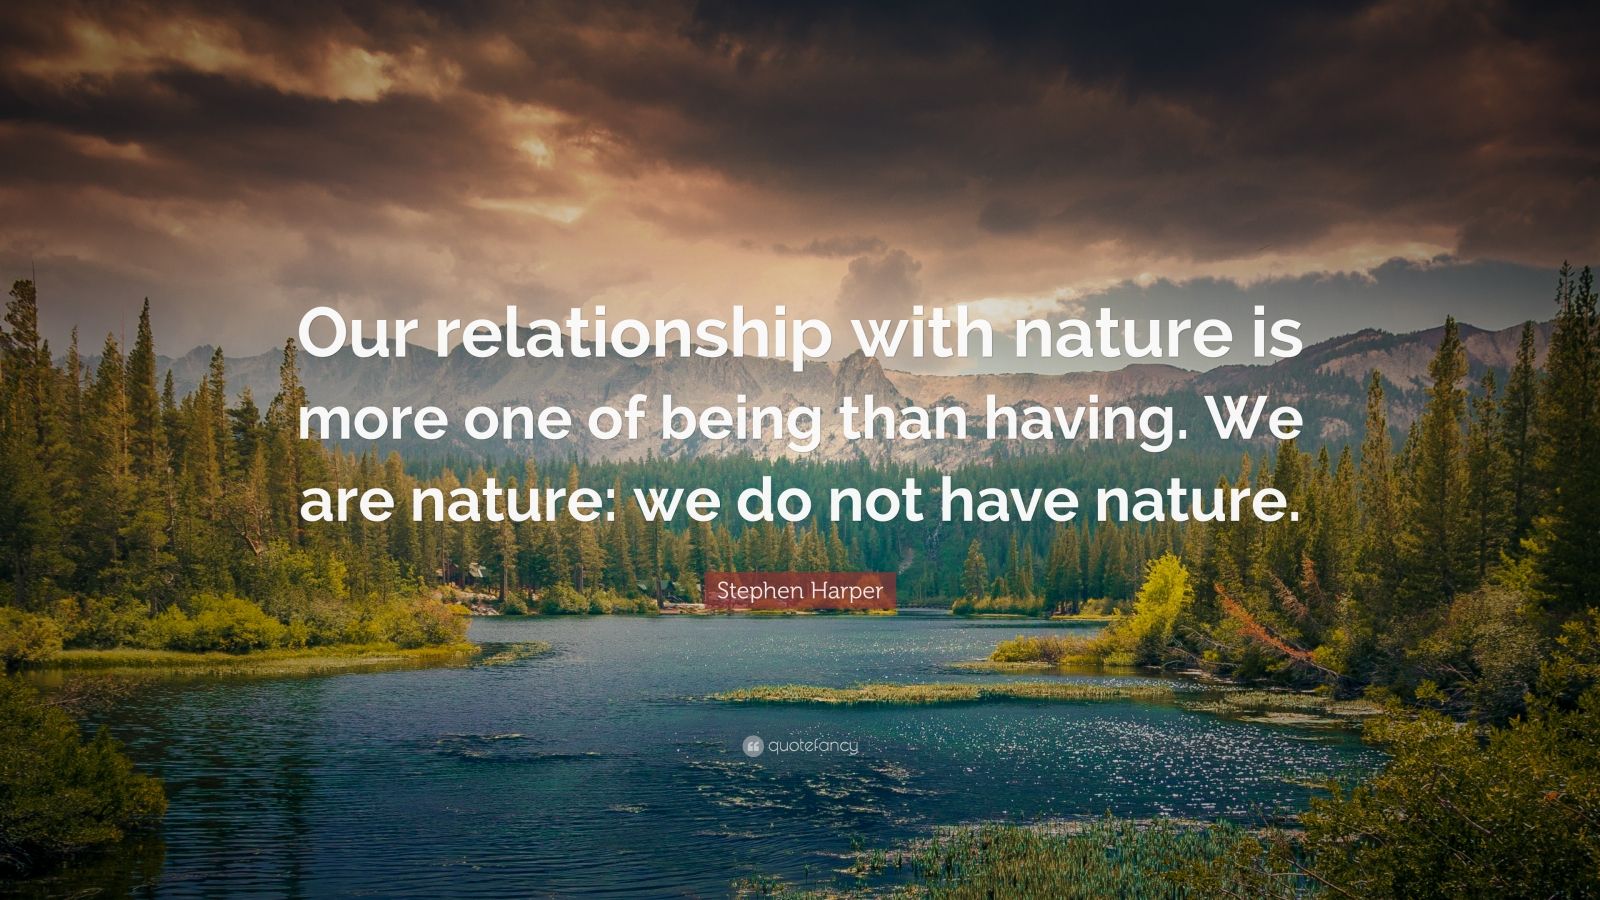 Stephen Harper Quote: “Our relationship with nature is more one of ...